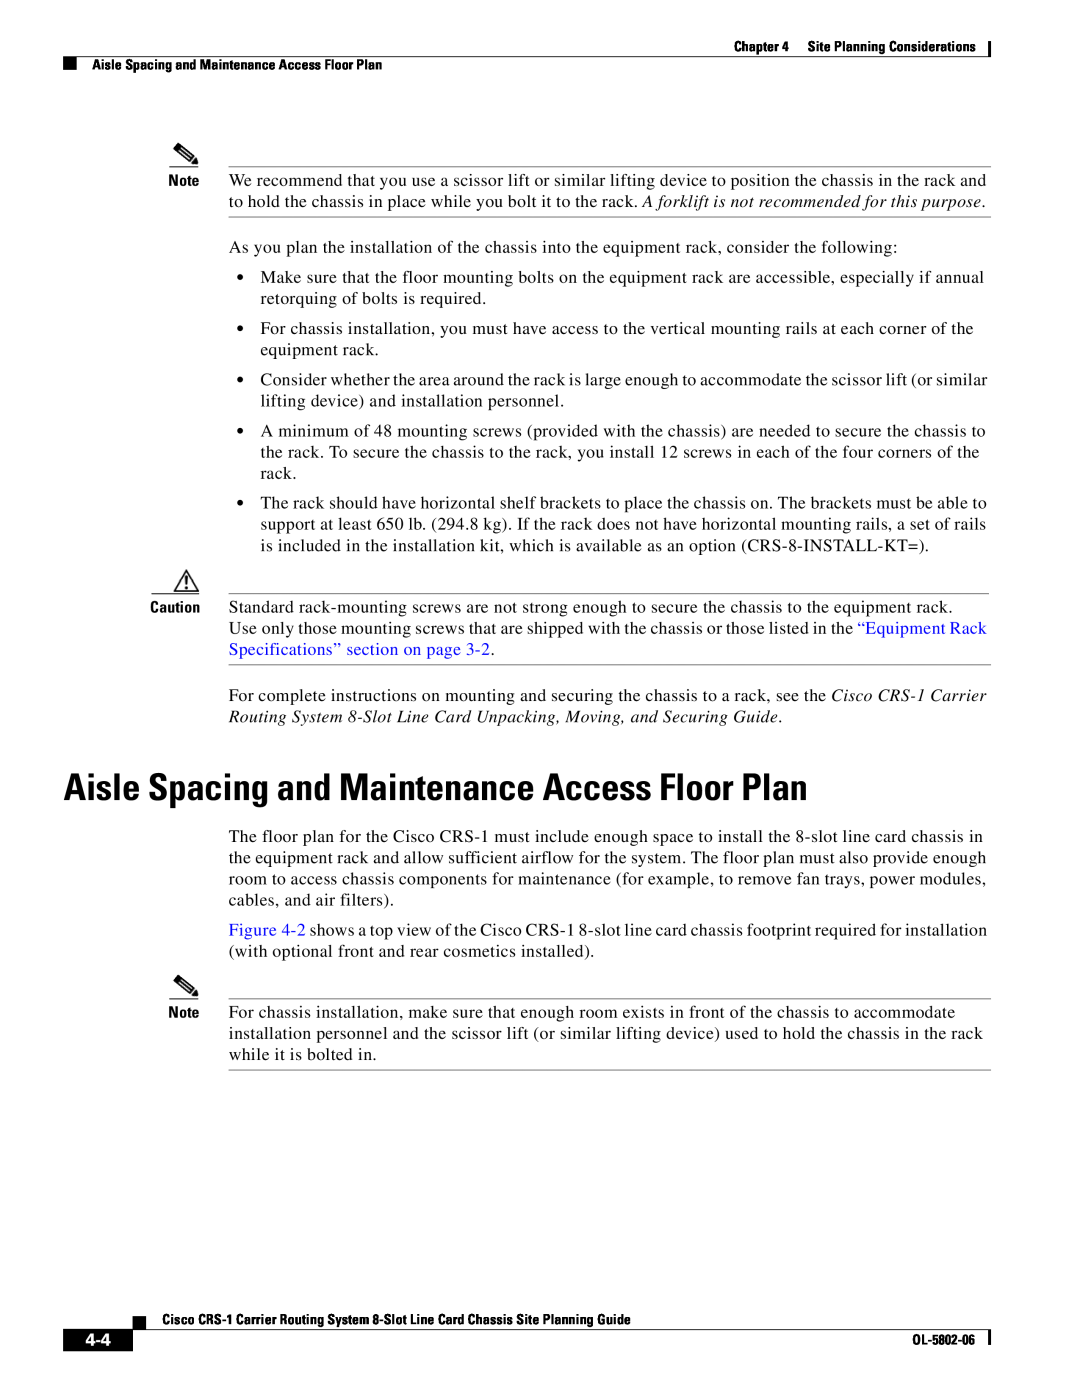 Cisco Systems CRS-1 manual Aisle Spacing and Maintenance Access Floor Plan 